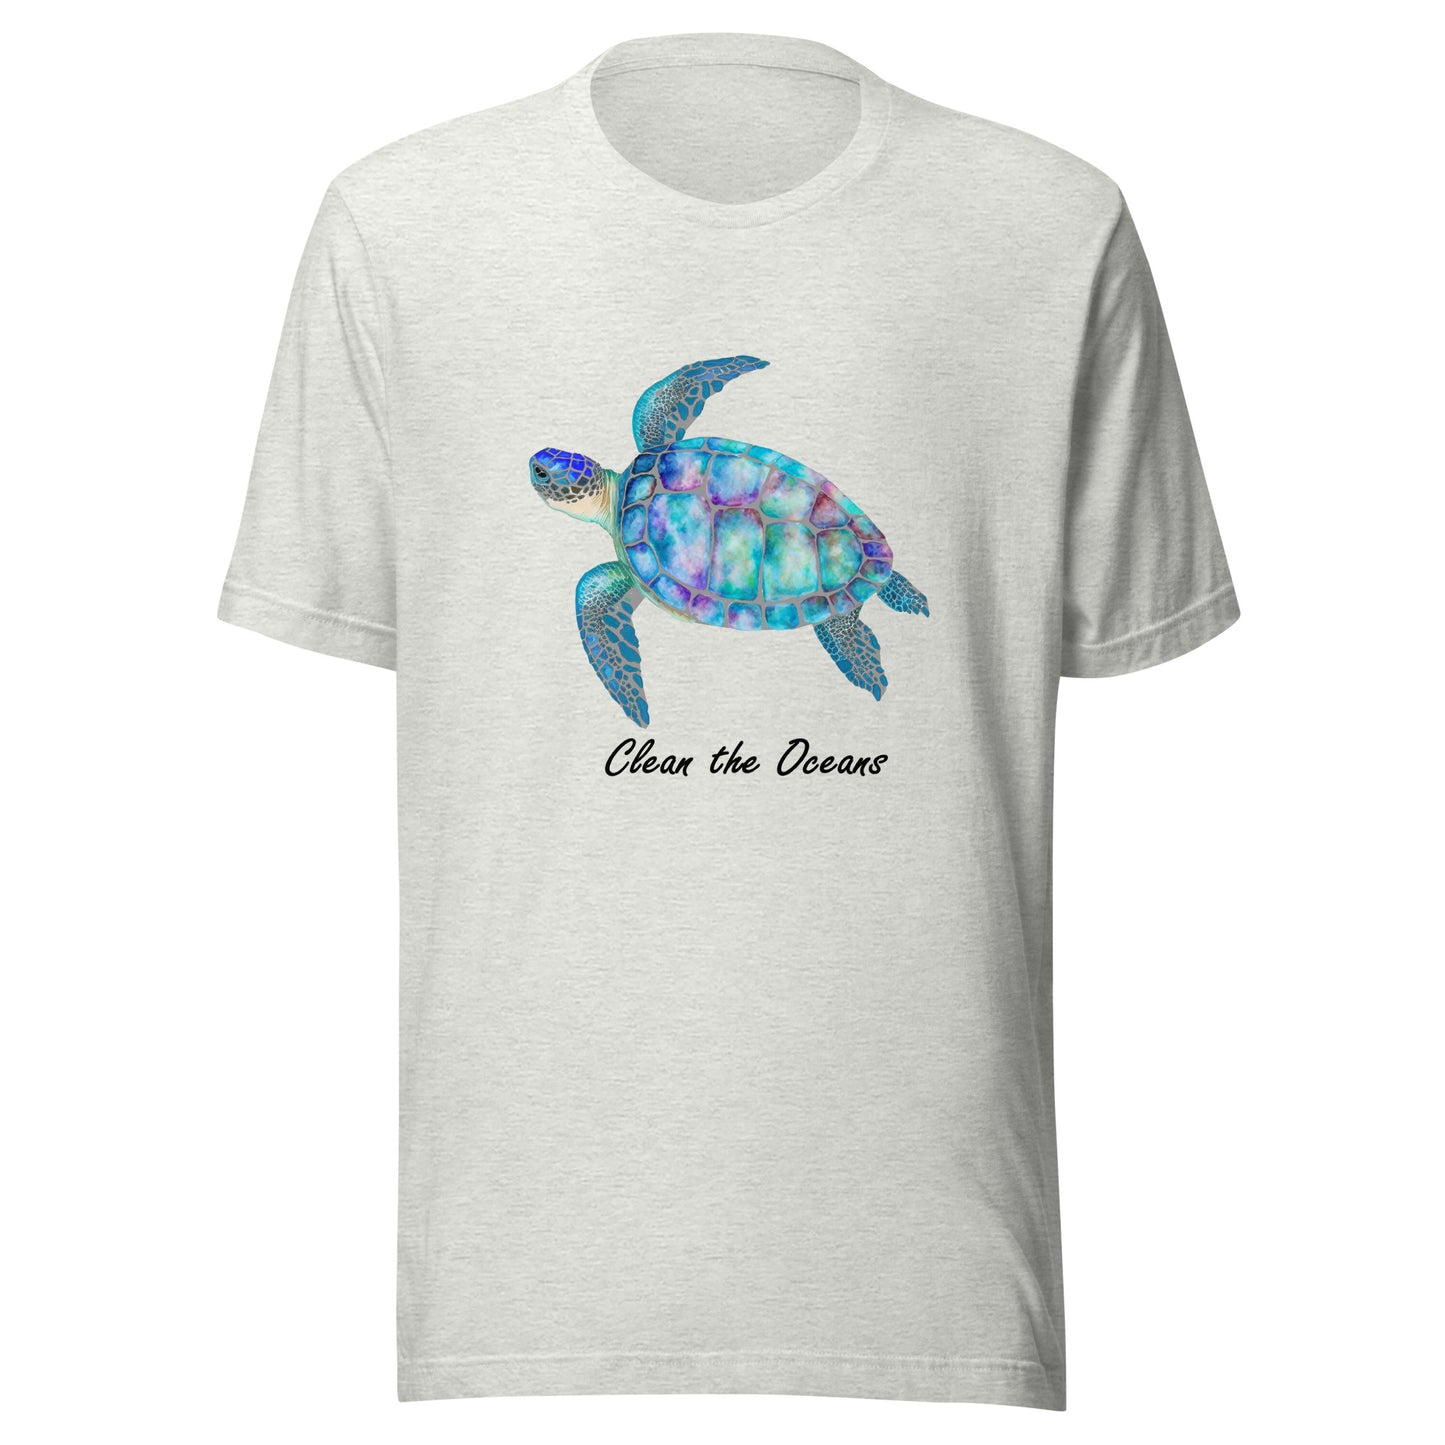 Women and Men's (Unisex) T-Shirt Printed with a Turtle labeled "Protect the Oceans"